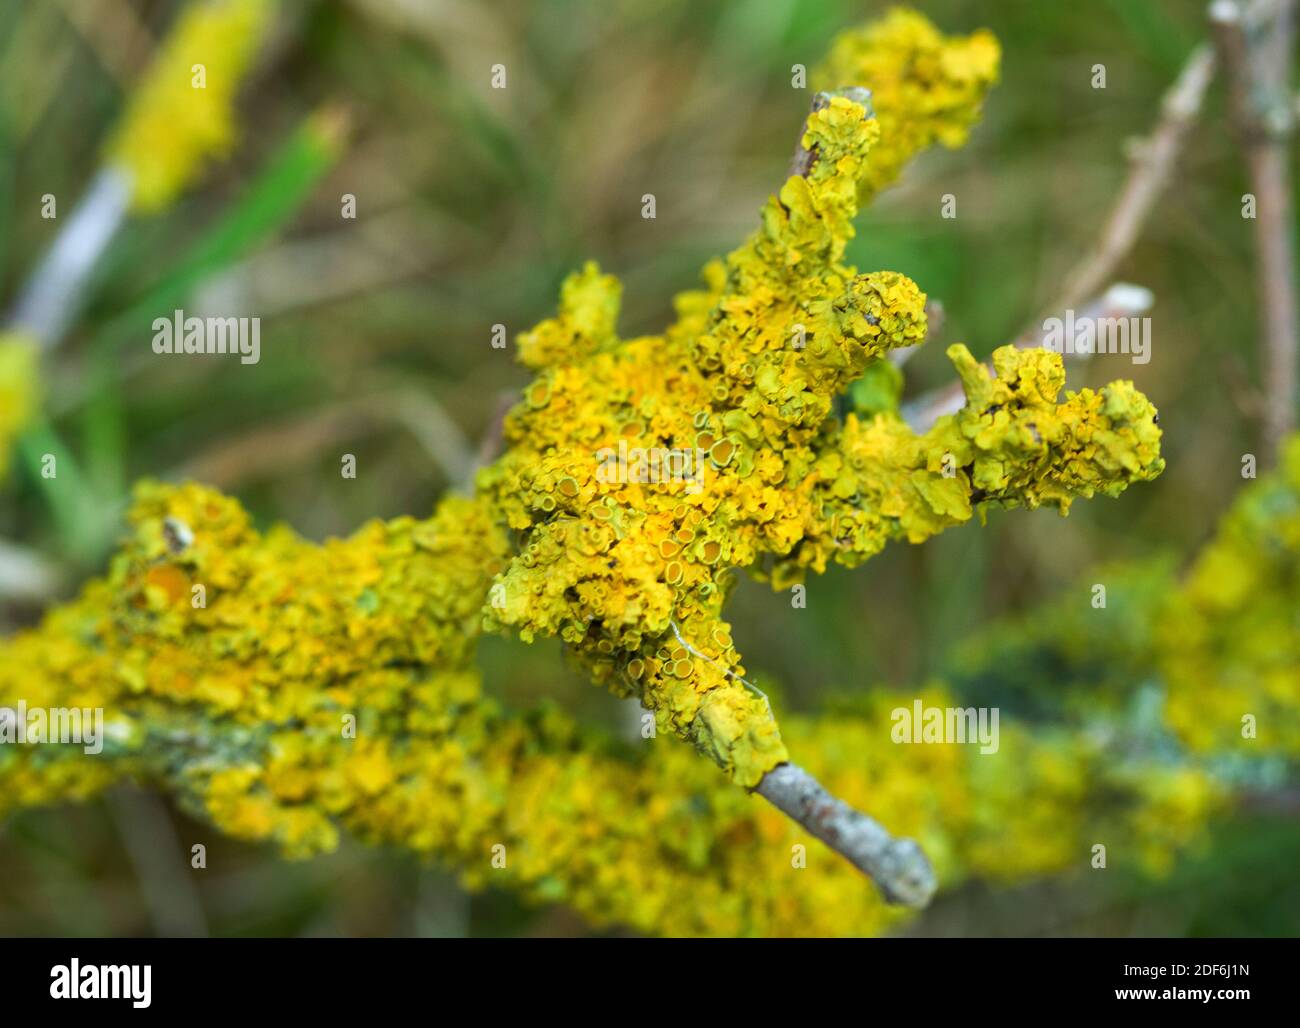 The cup-like structures in the Yellow Twig Lichen are the ascocarps, or the spore producing bodies. This Yellow Lichen is one of the most common Stock Photo